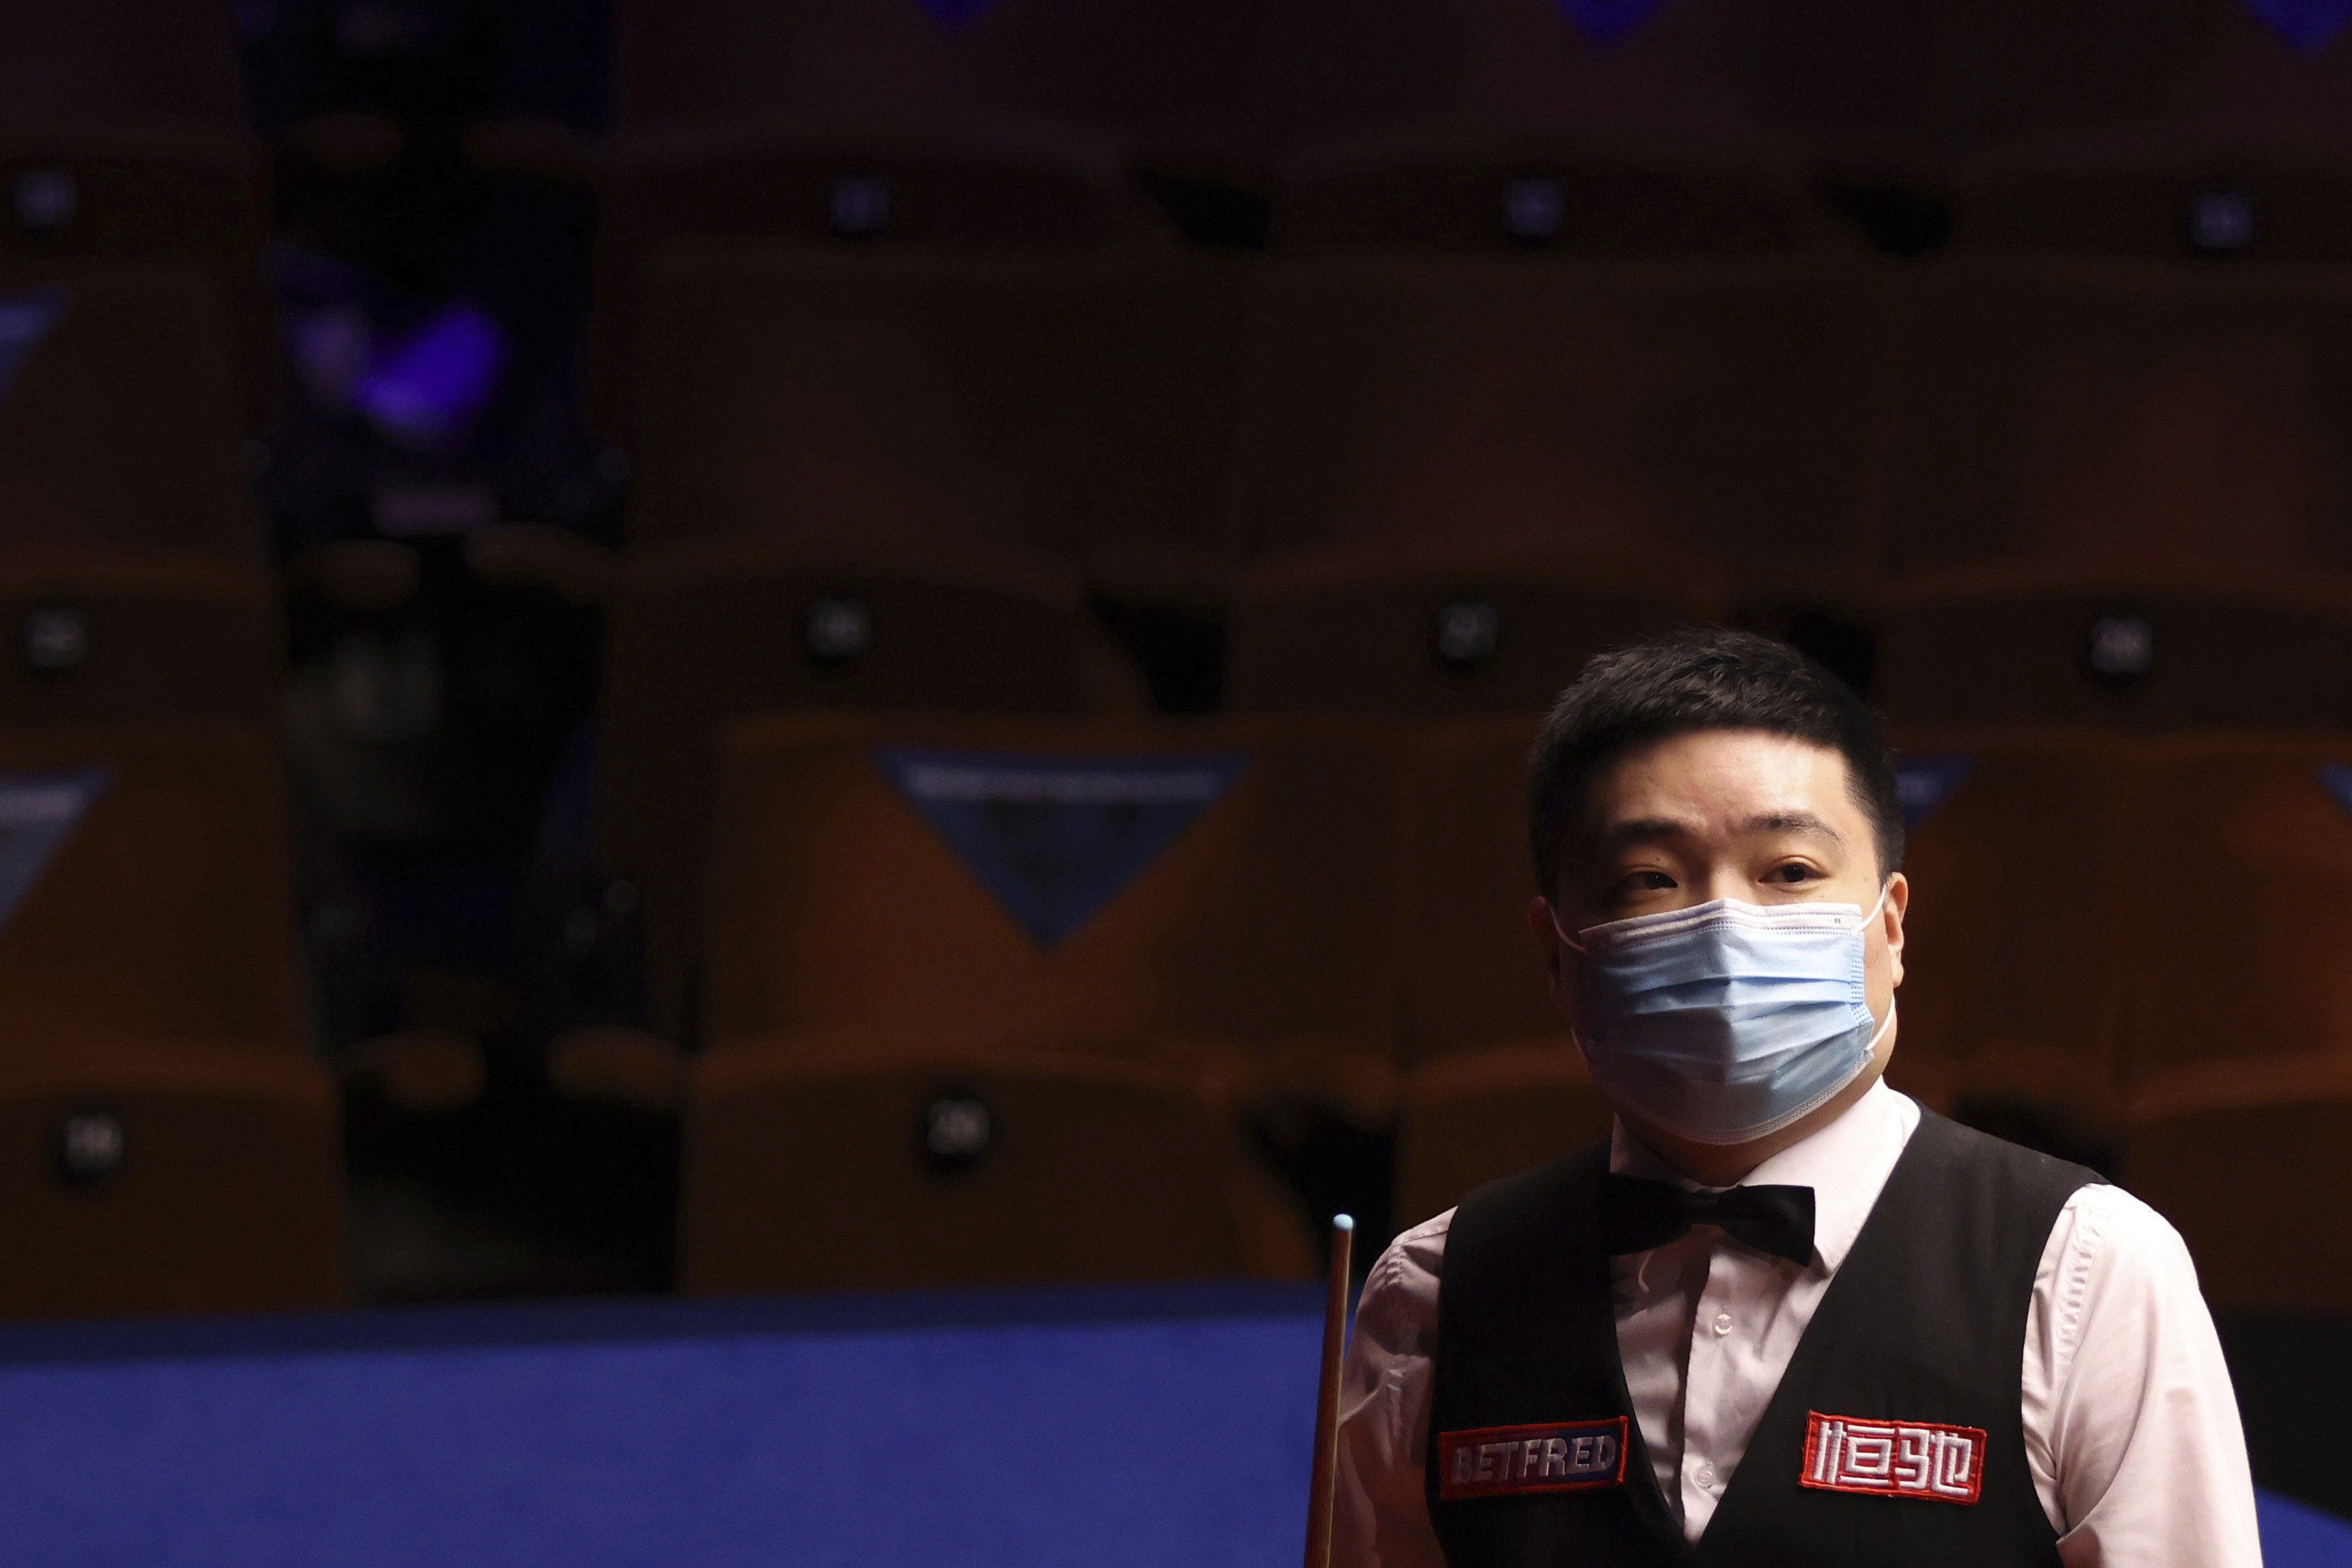 Ding Junhui during his match against Stuart Bingham at the World Snooker Championships. Photo: AP